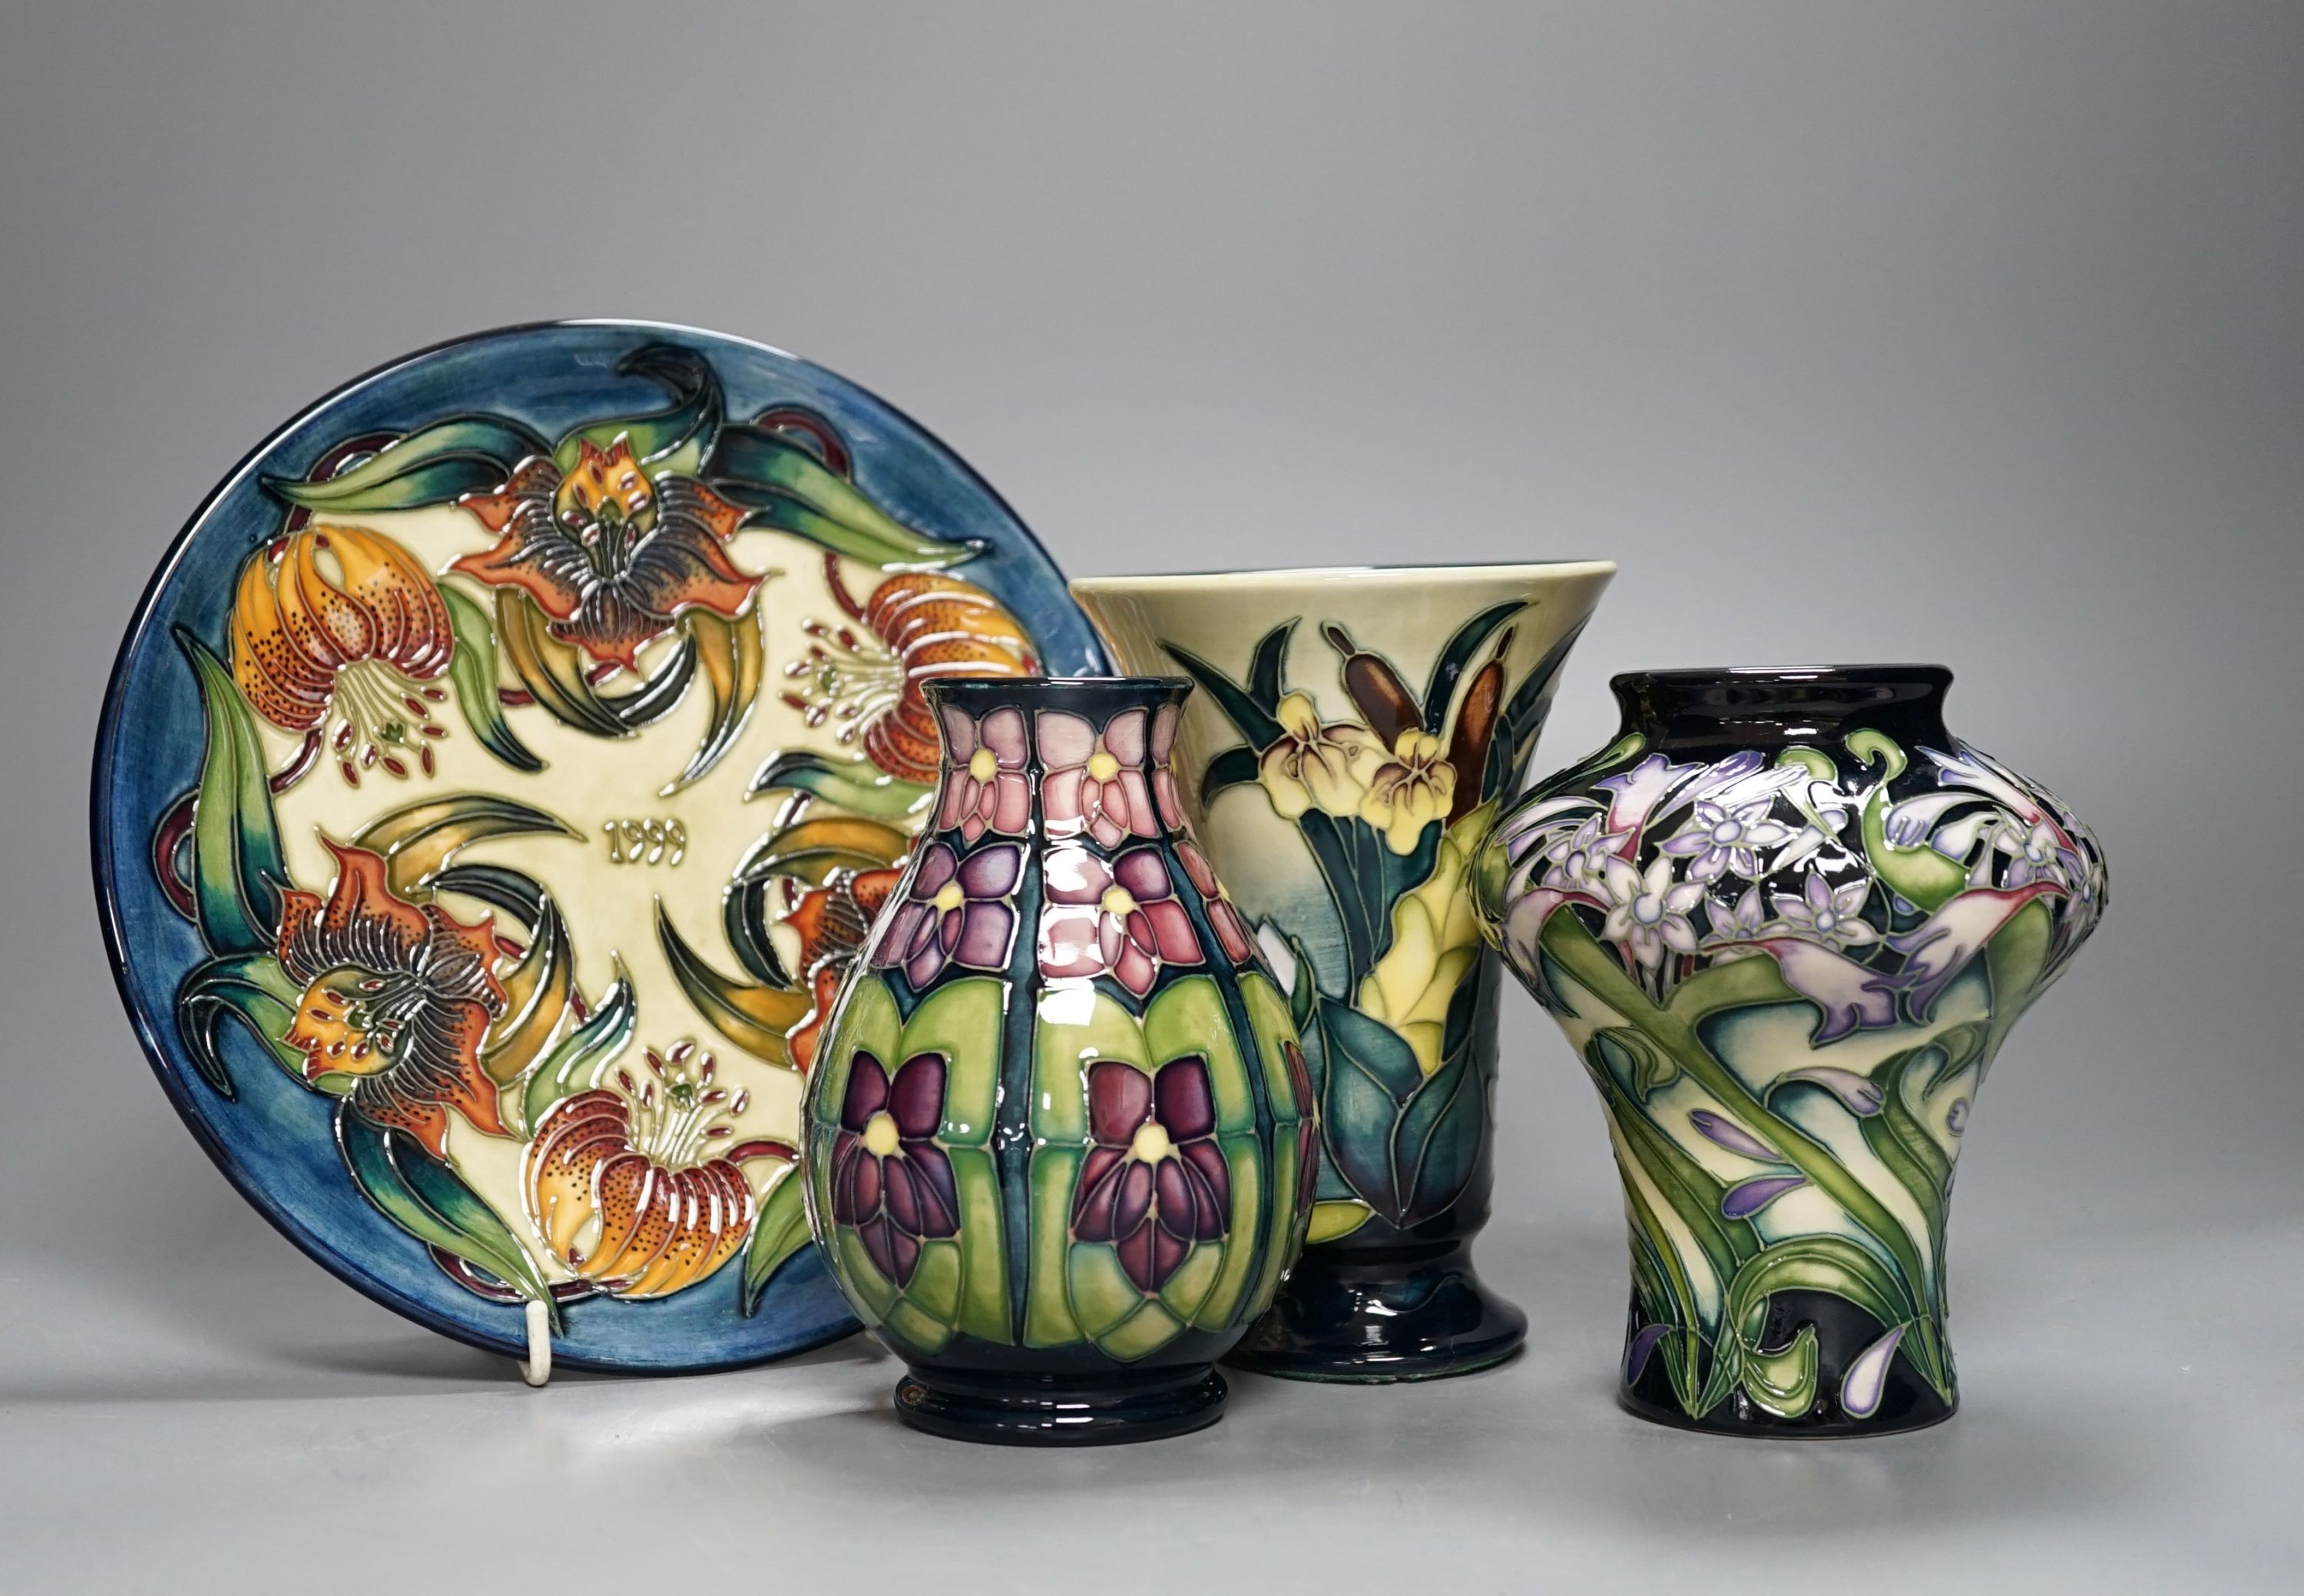 Three modern Moorcroft vases, tallest 15.5 cm and a plate 22 cm